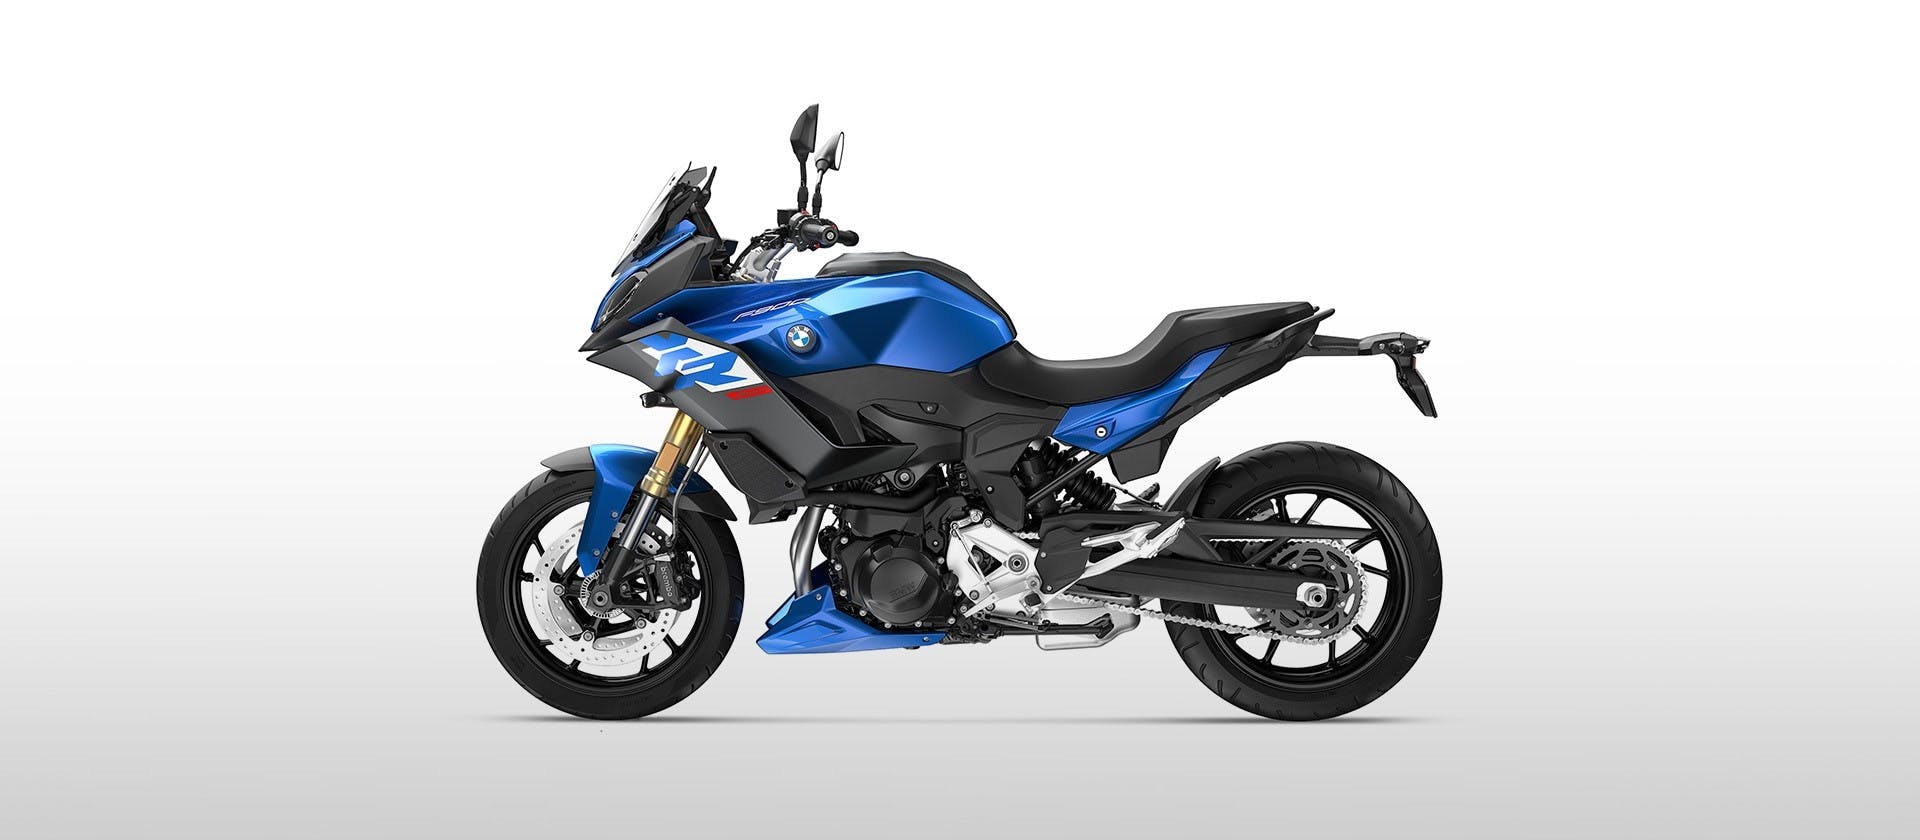 BMW F 900 XR in racing blue colour